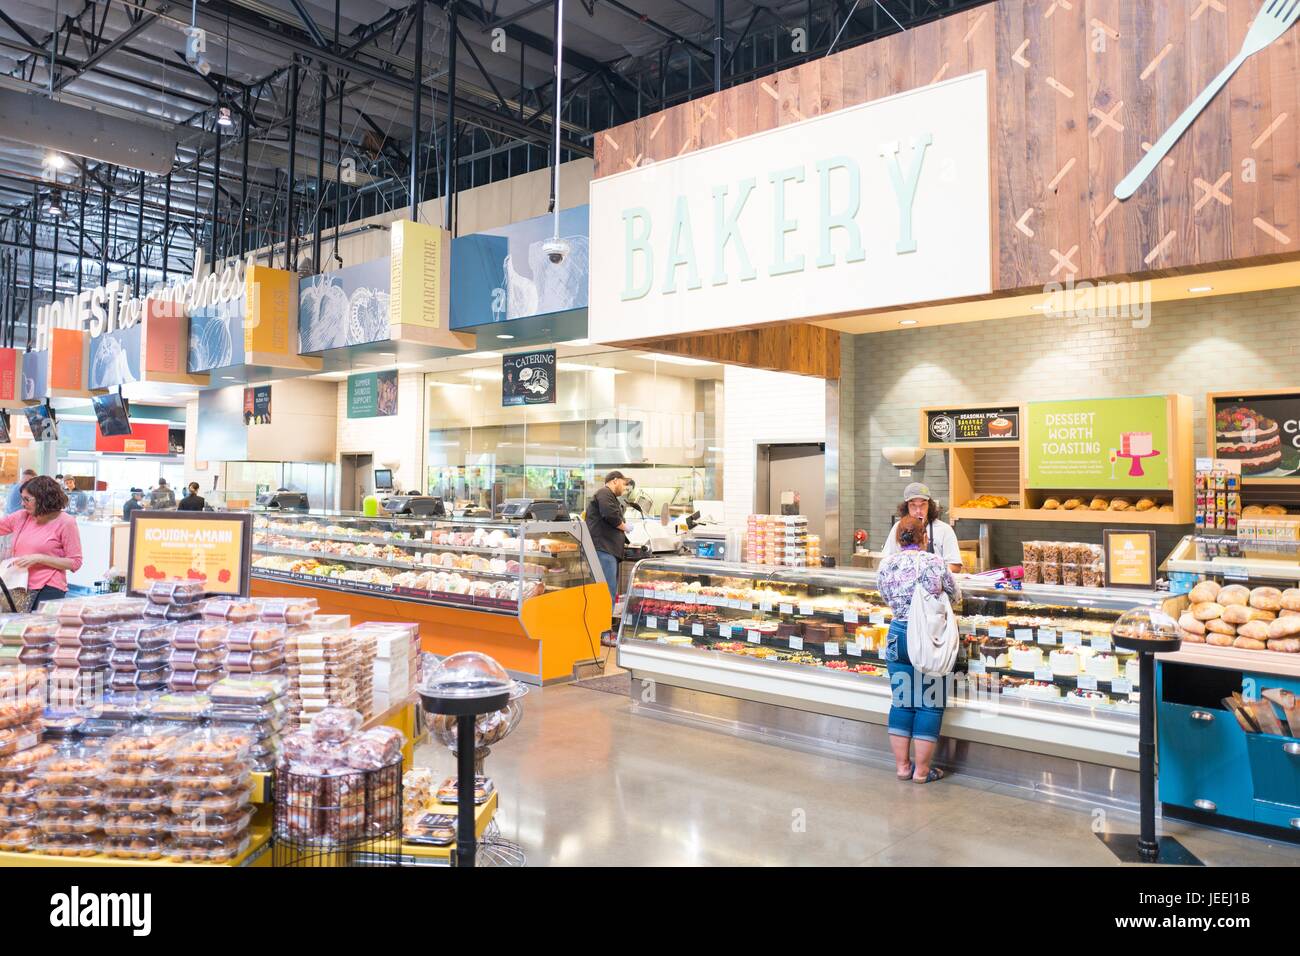 Shoppers visit the bakery section at the Whole Foods Market grocery store in Dublin, California, June 16, 2017. Stock Photo